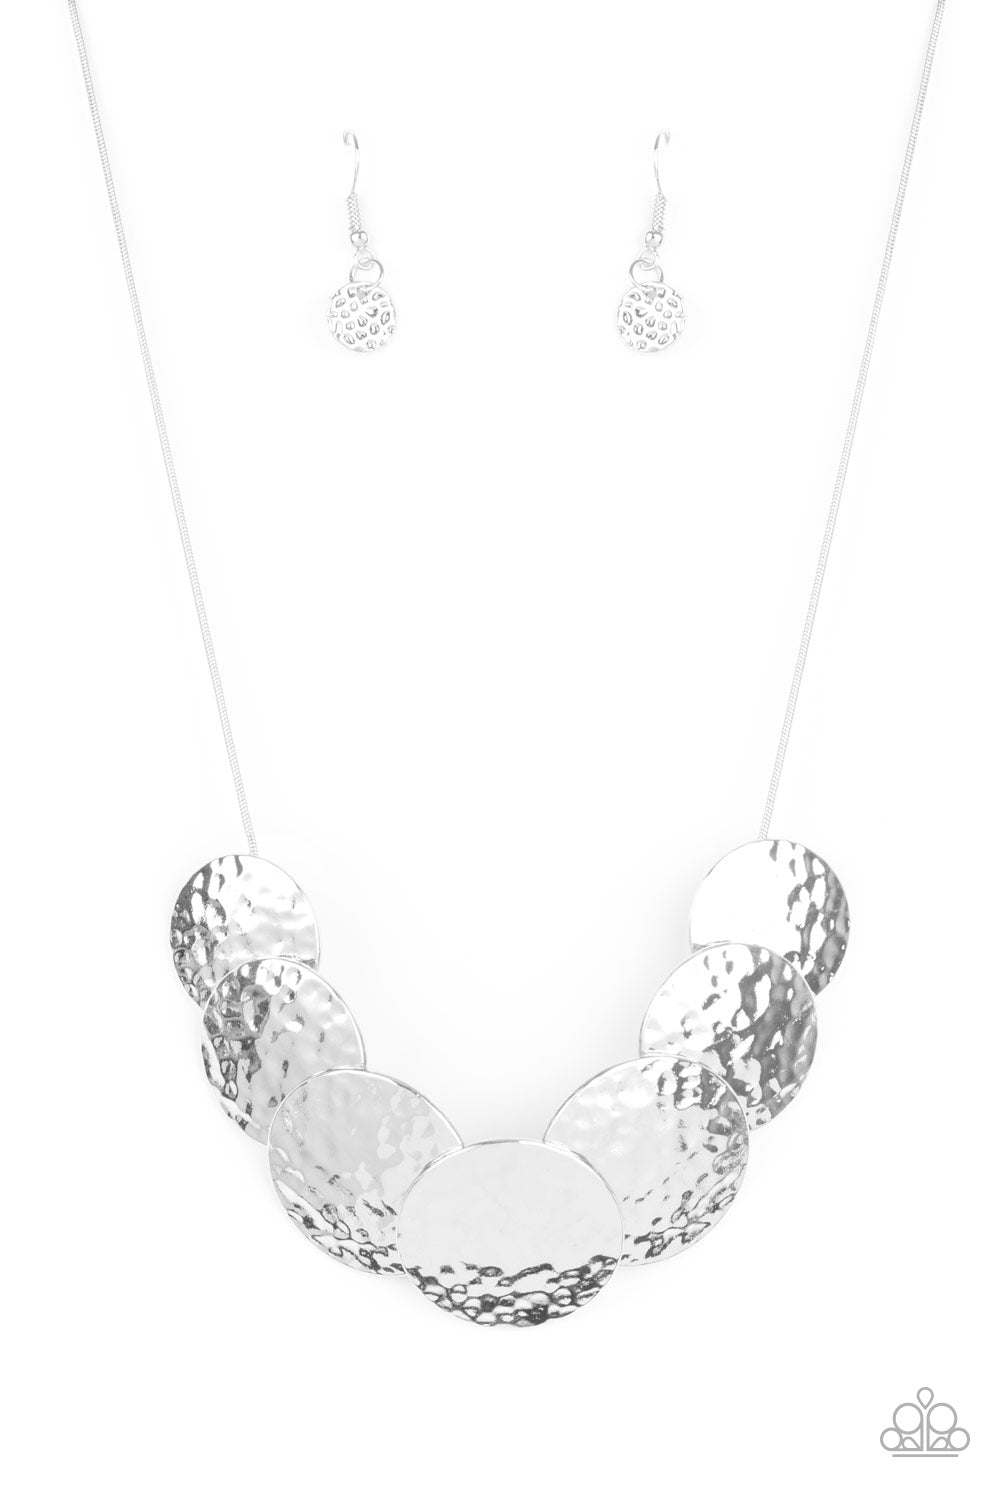 RADIAL Waves Necklace - Silver